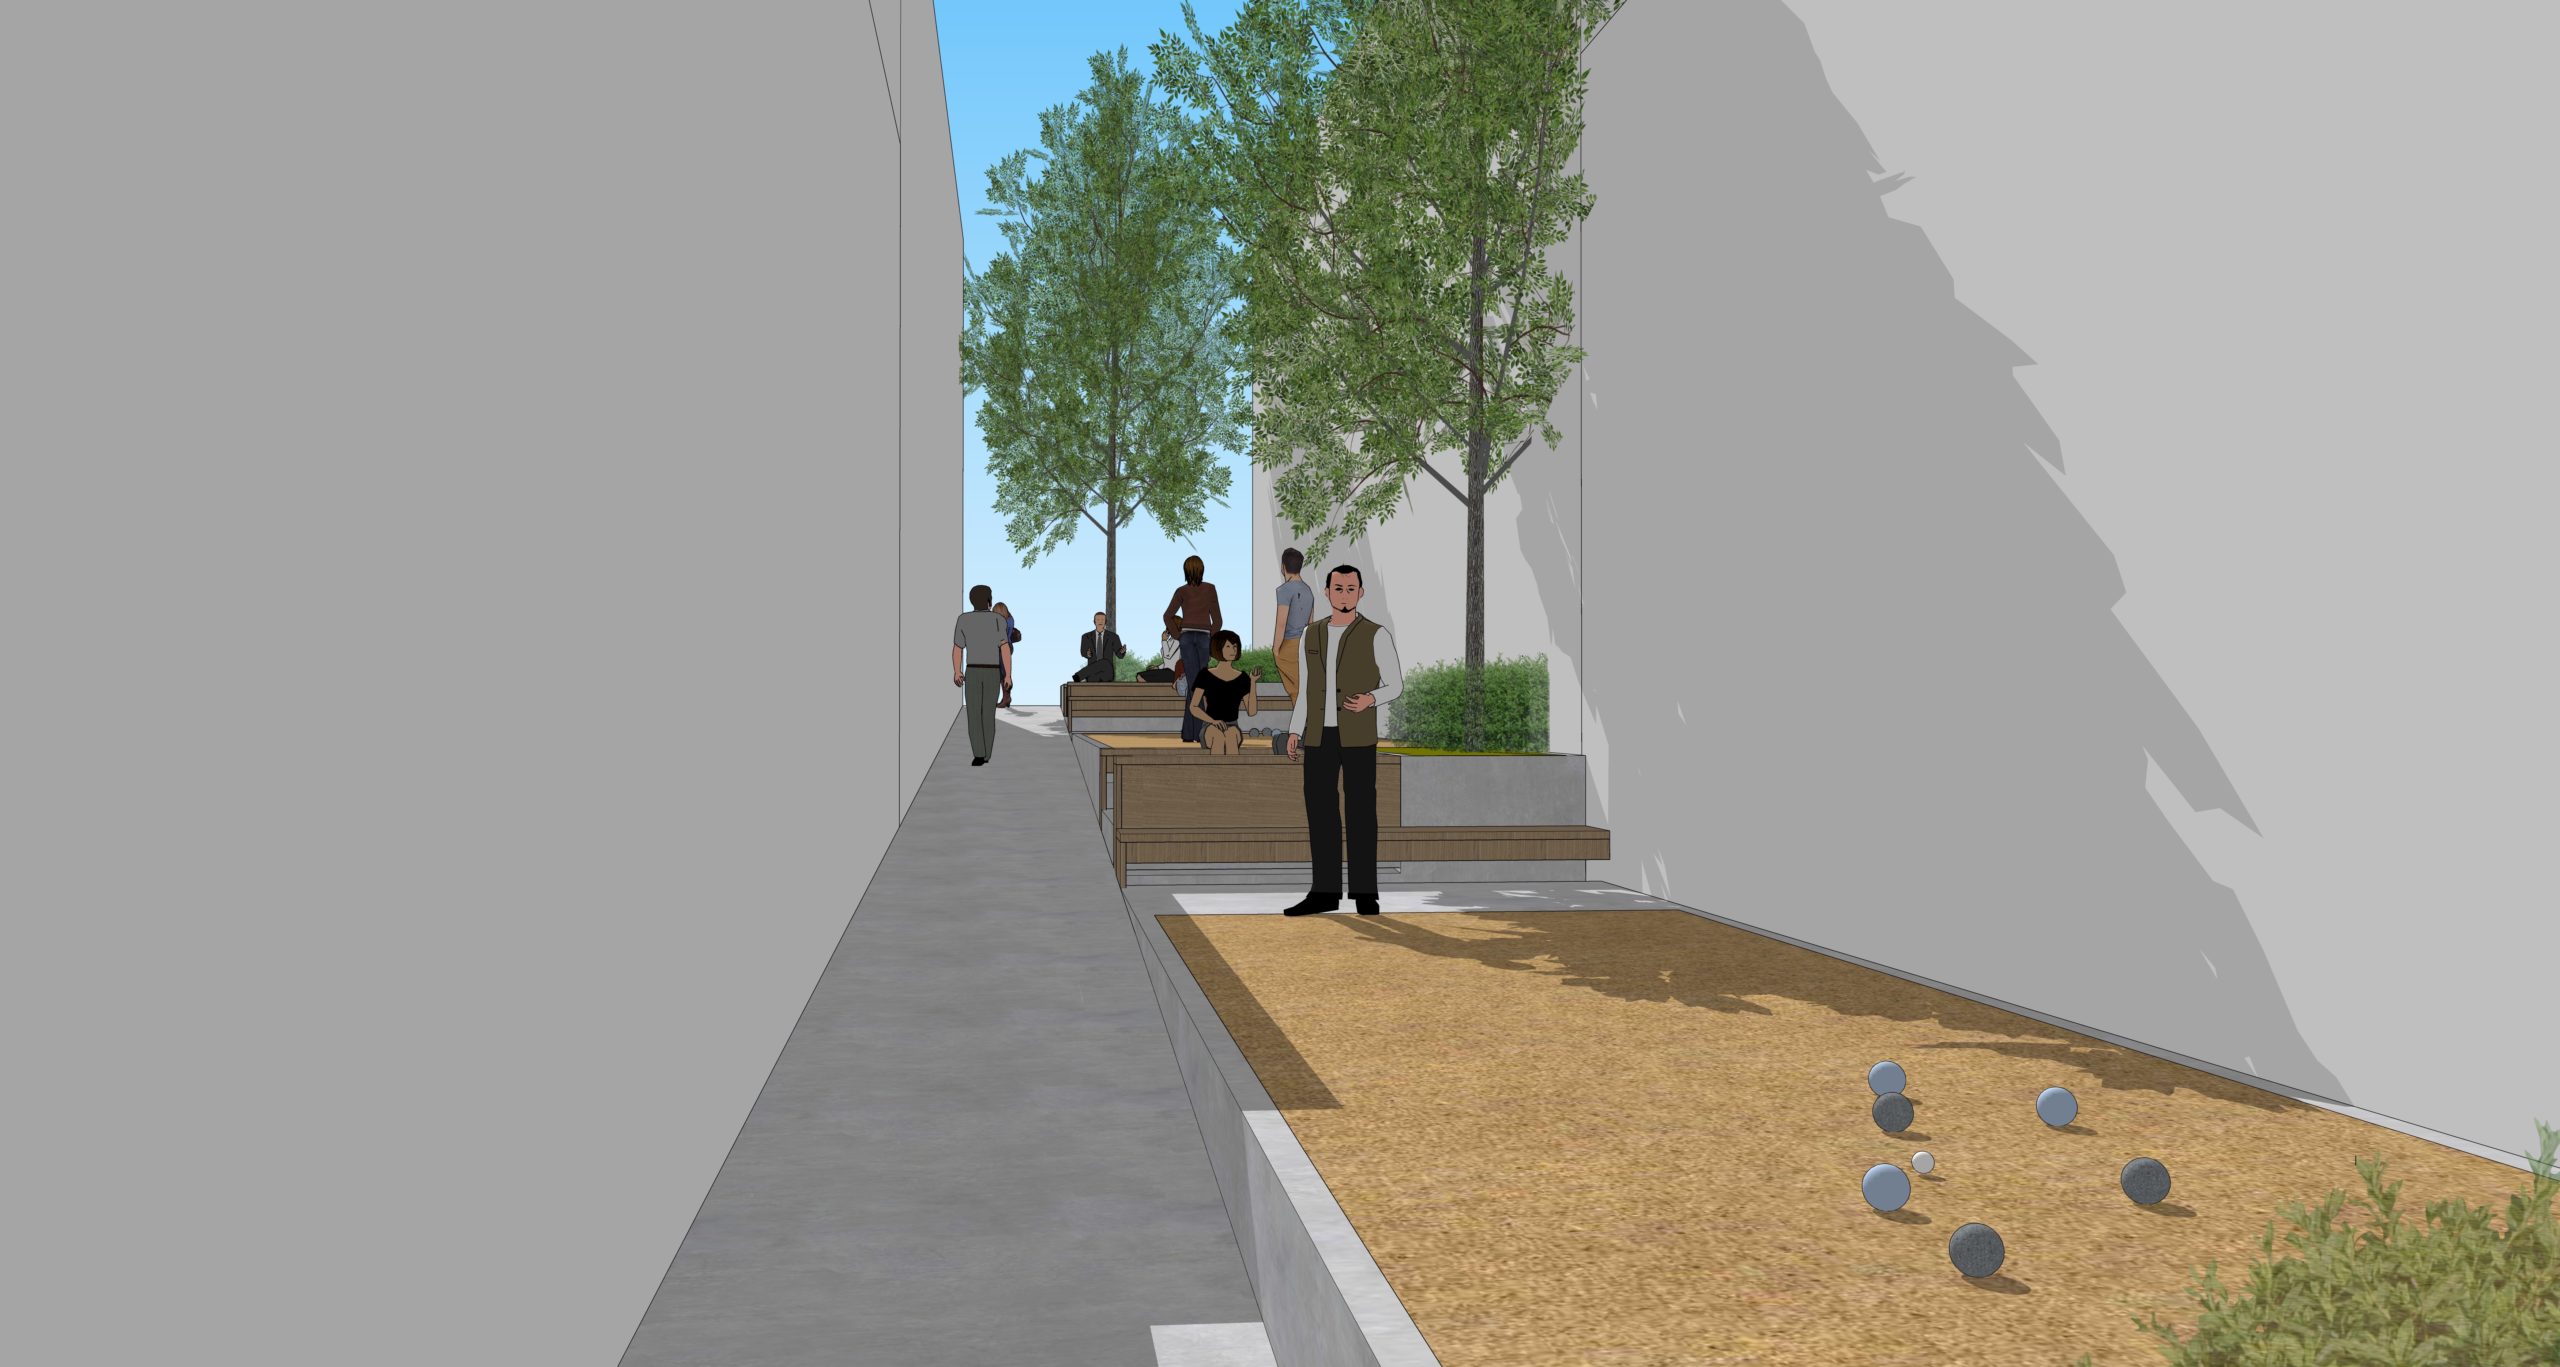 The architect Blaze Makoid has proposed installing two courts for the French game, petanque, in the alley between the Sag Harbor Variety Store and Sag Harbor Pharmacy. COURTESY BLAZE MAKOID ARCHITECTURE